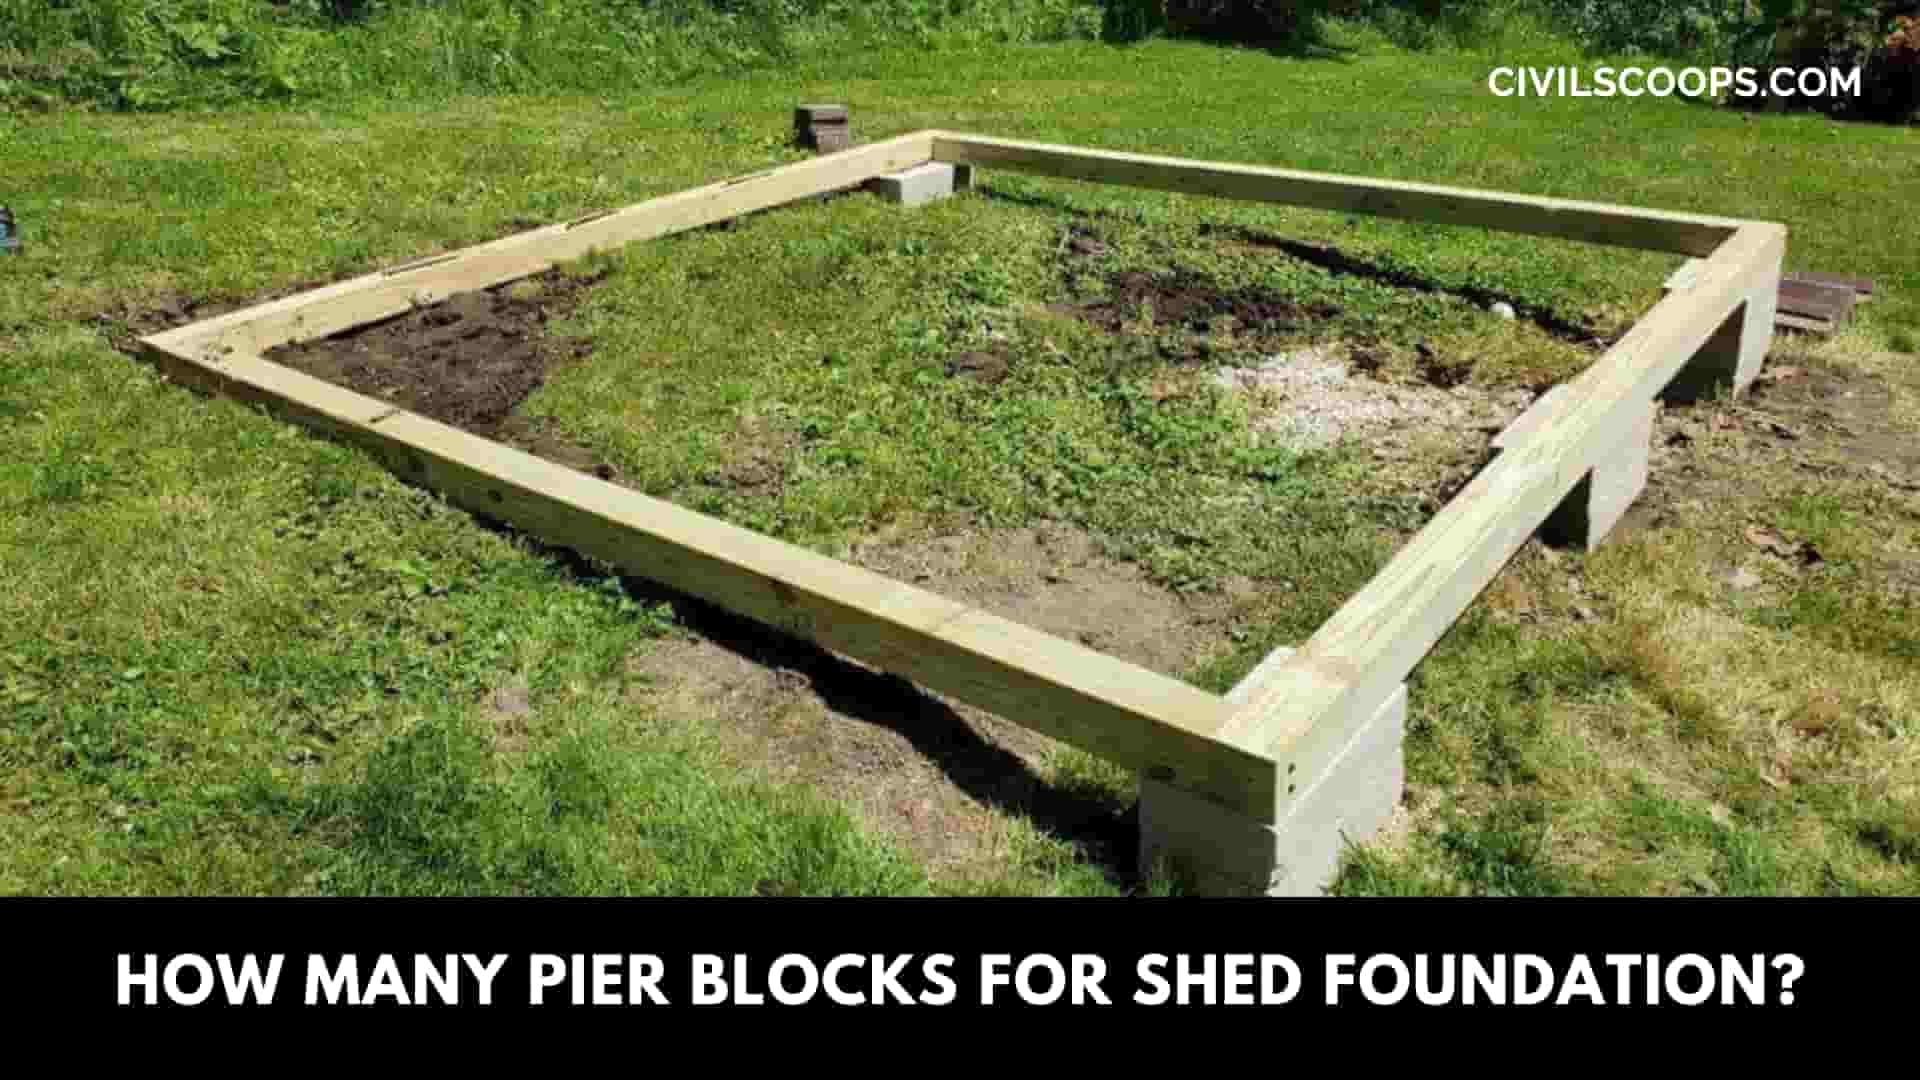 How Many Pier Blocks for Shed Foundation?